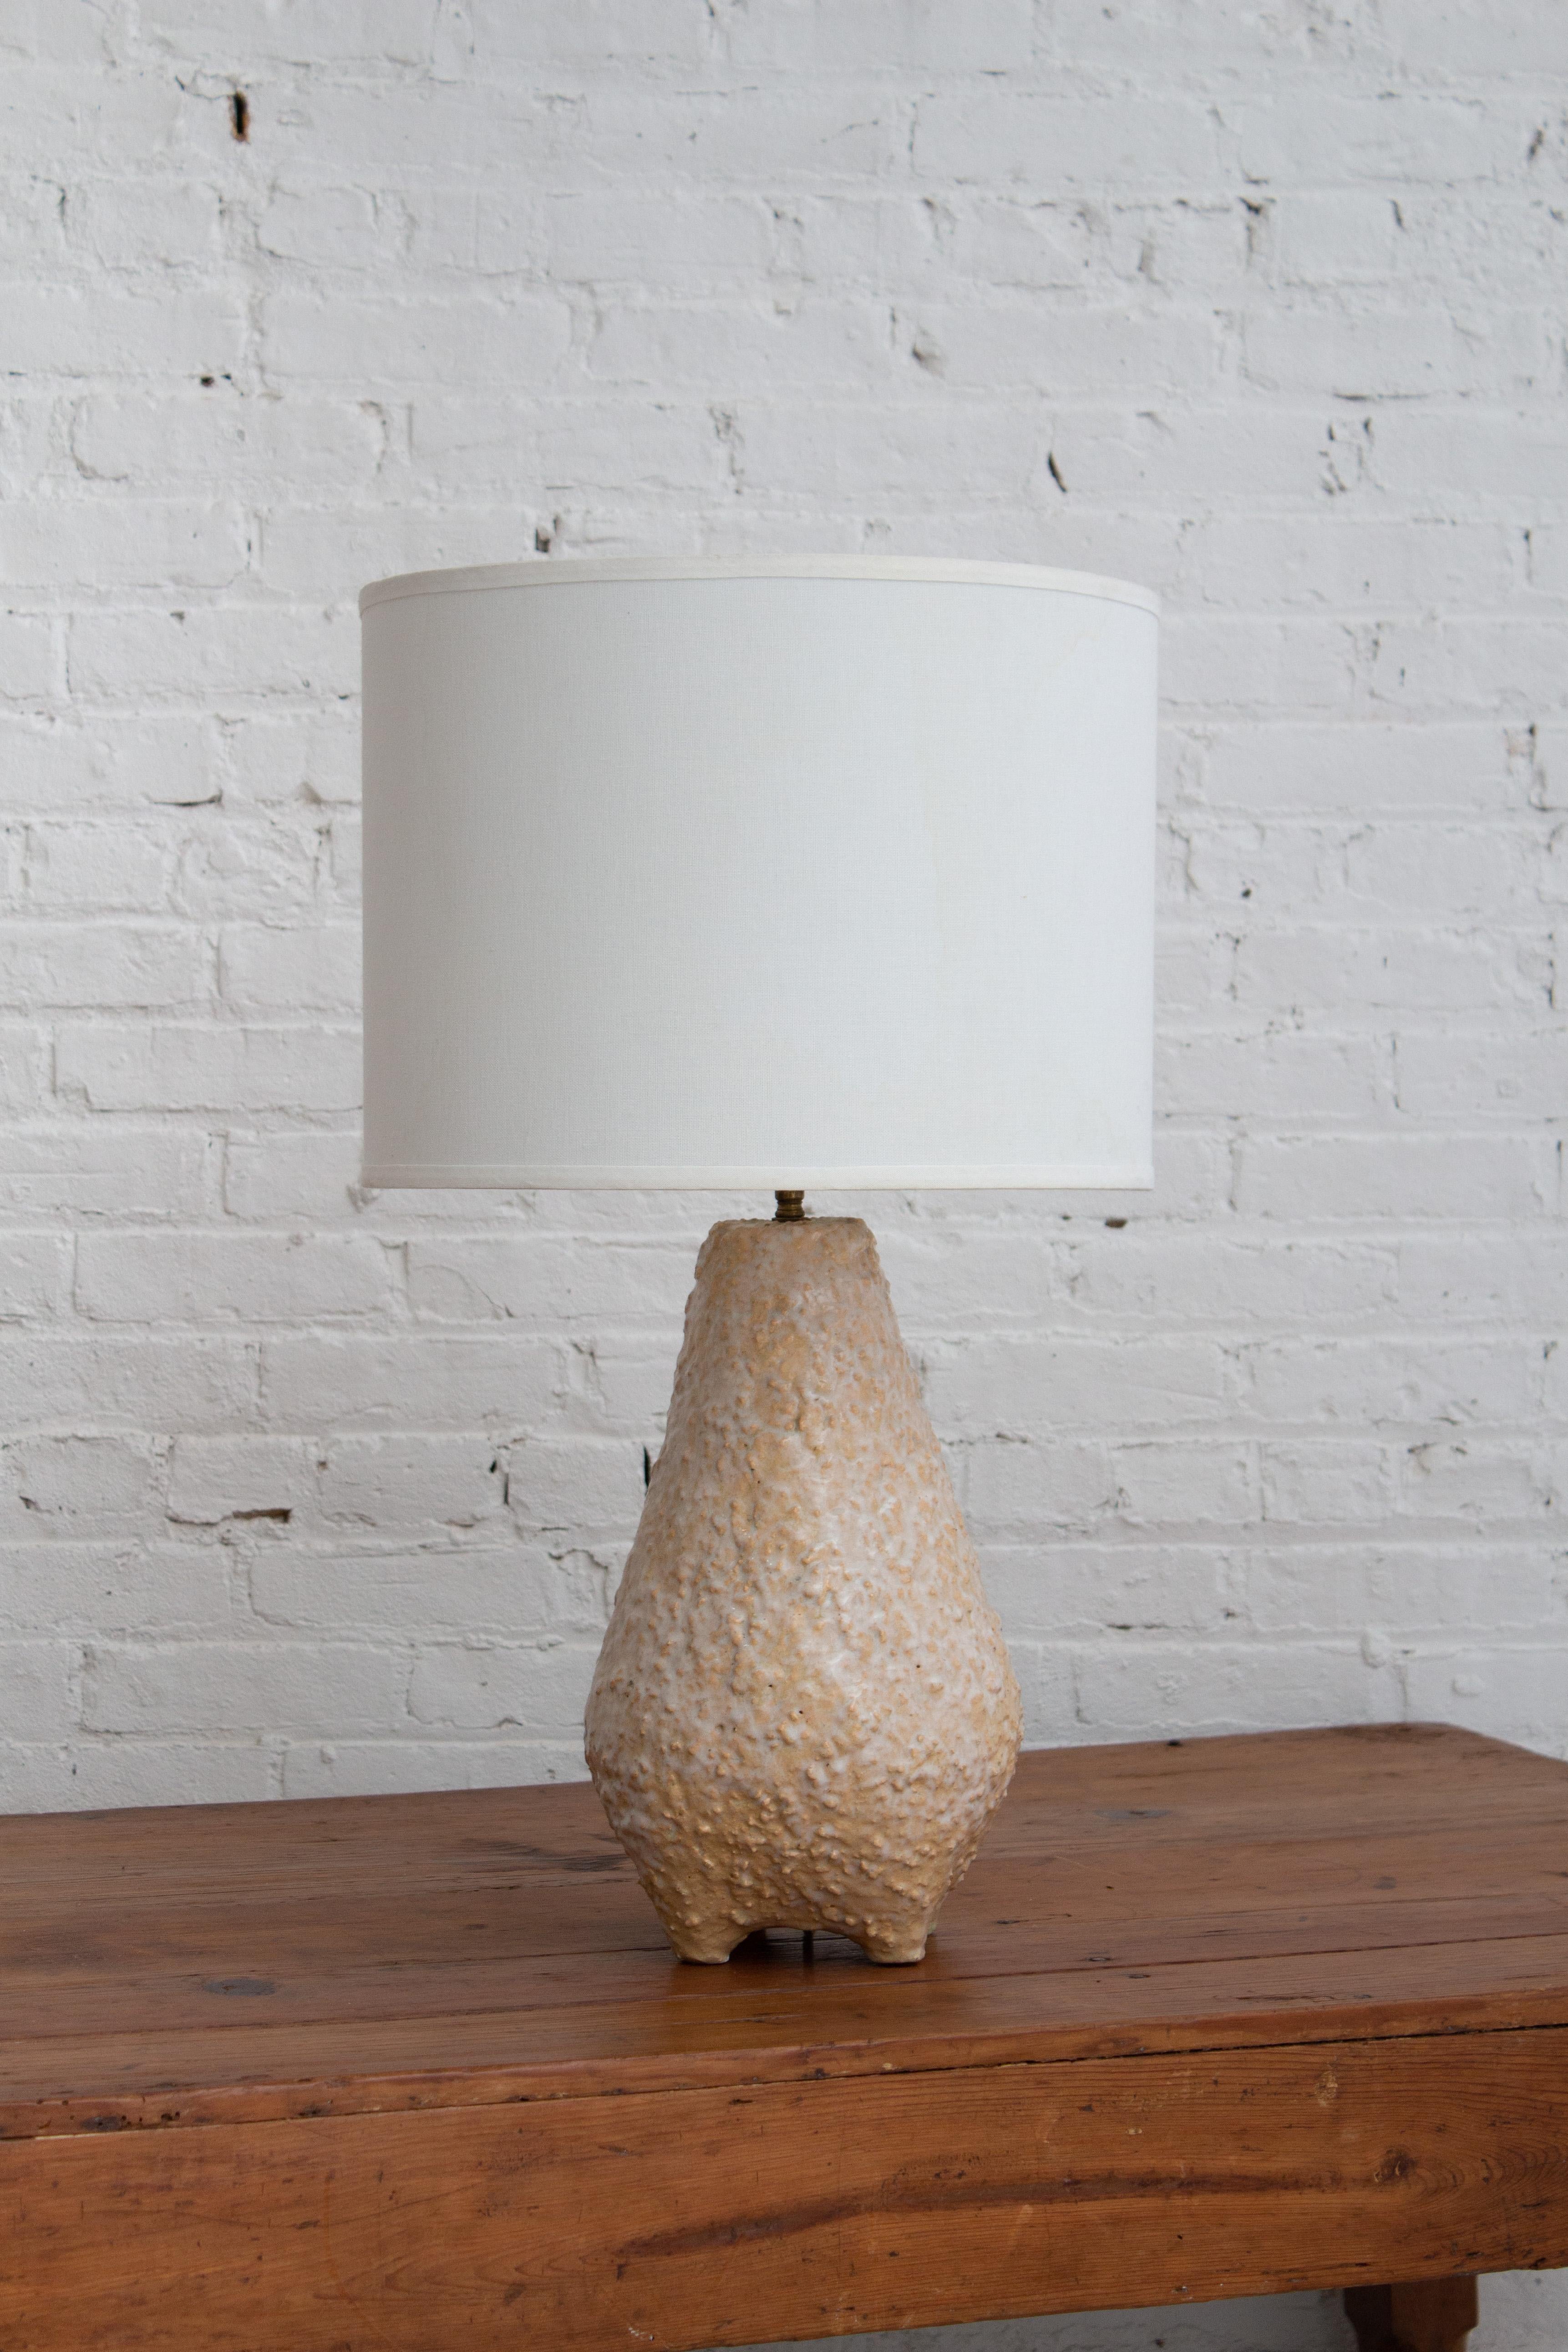 A mid century studio made ceramic lamp. Organic silhouette with a textured surface and glossy glaze. Ceramic measures 15” to base of hardware. Lampshade not included.